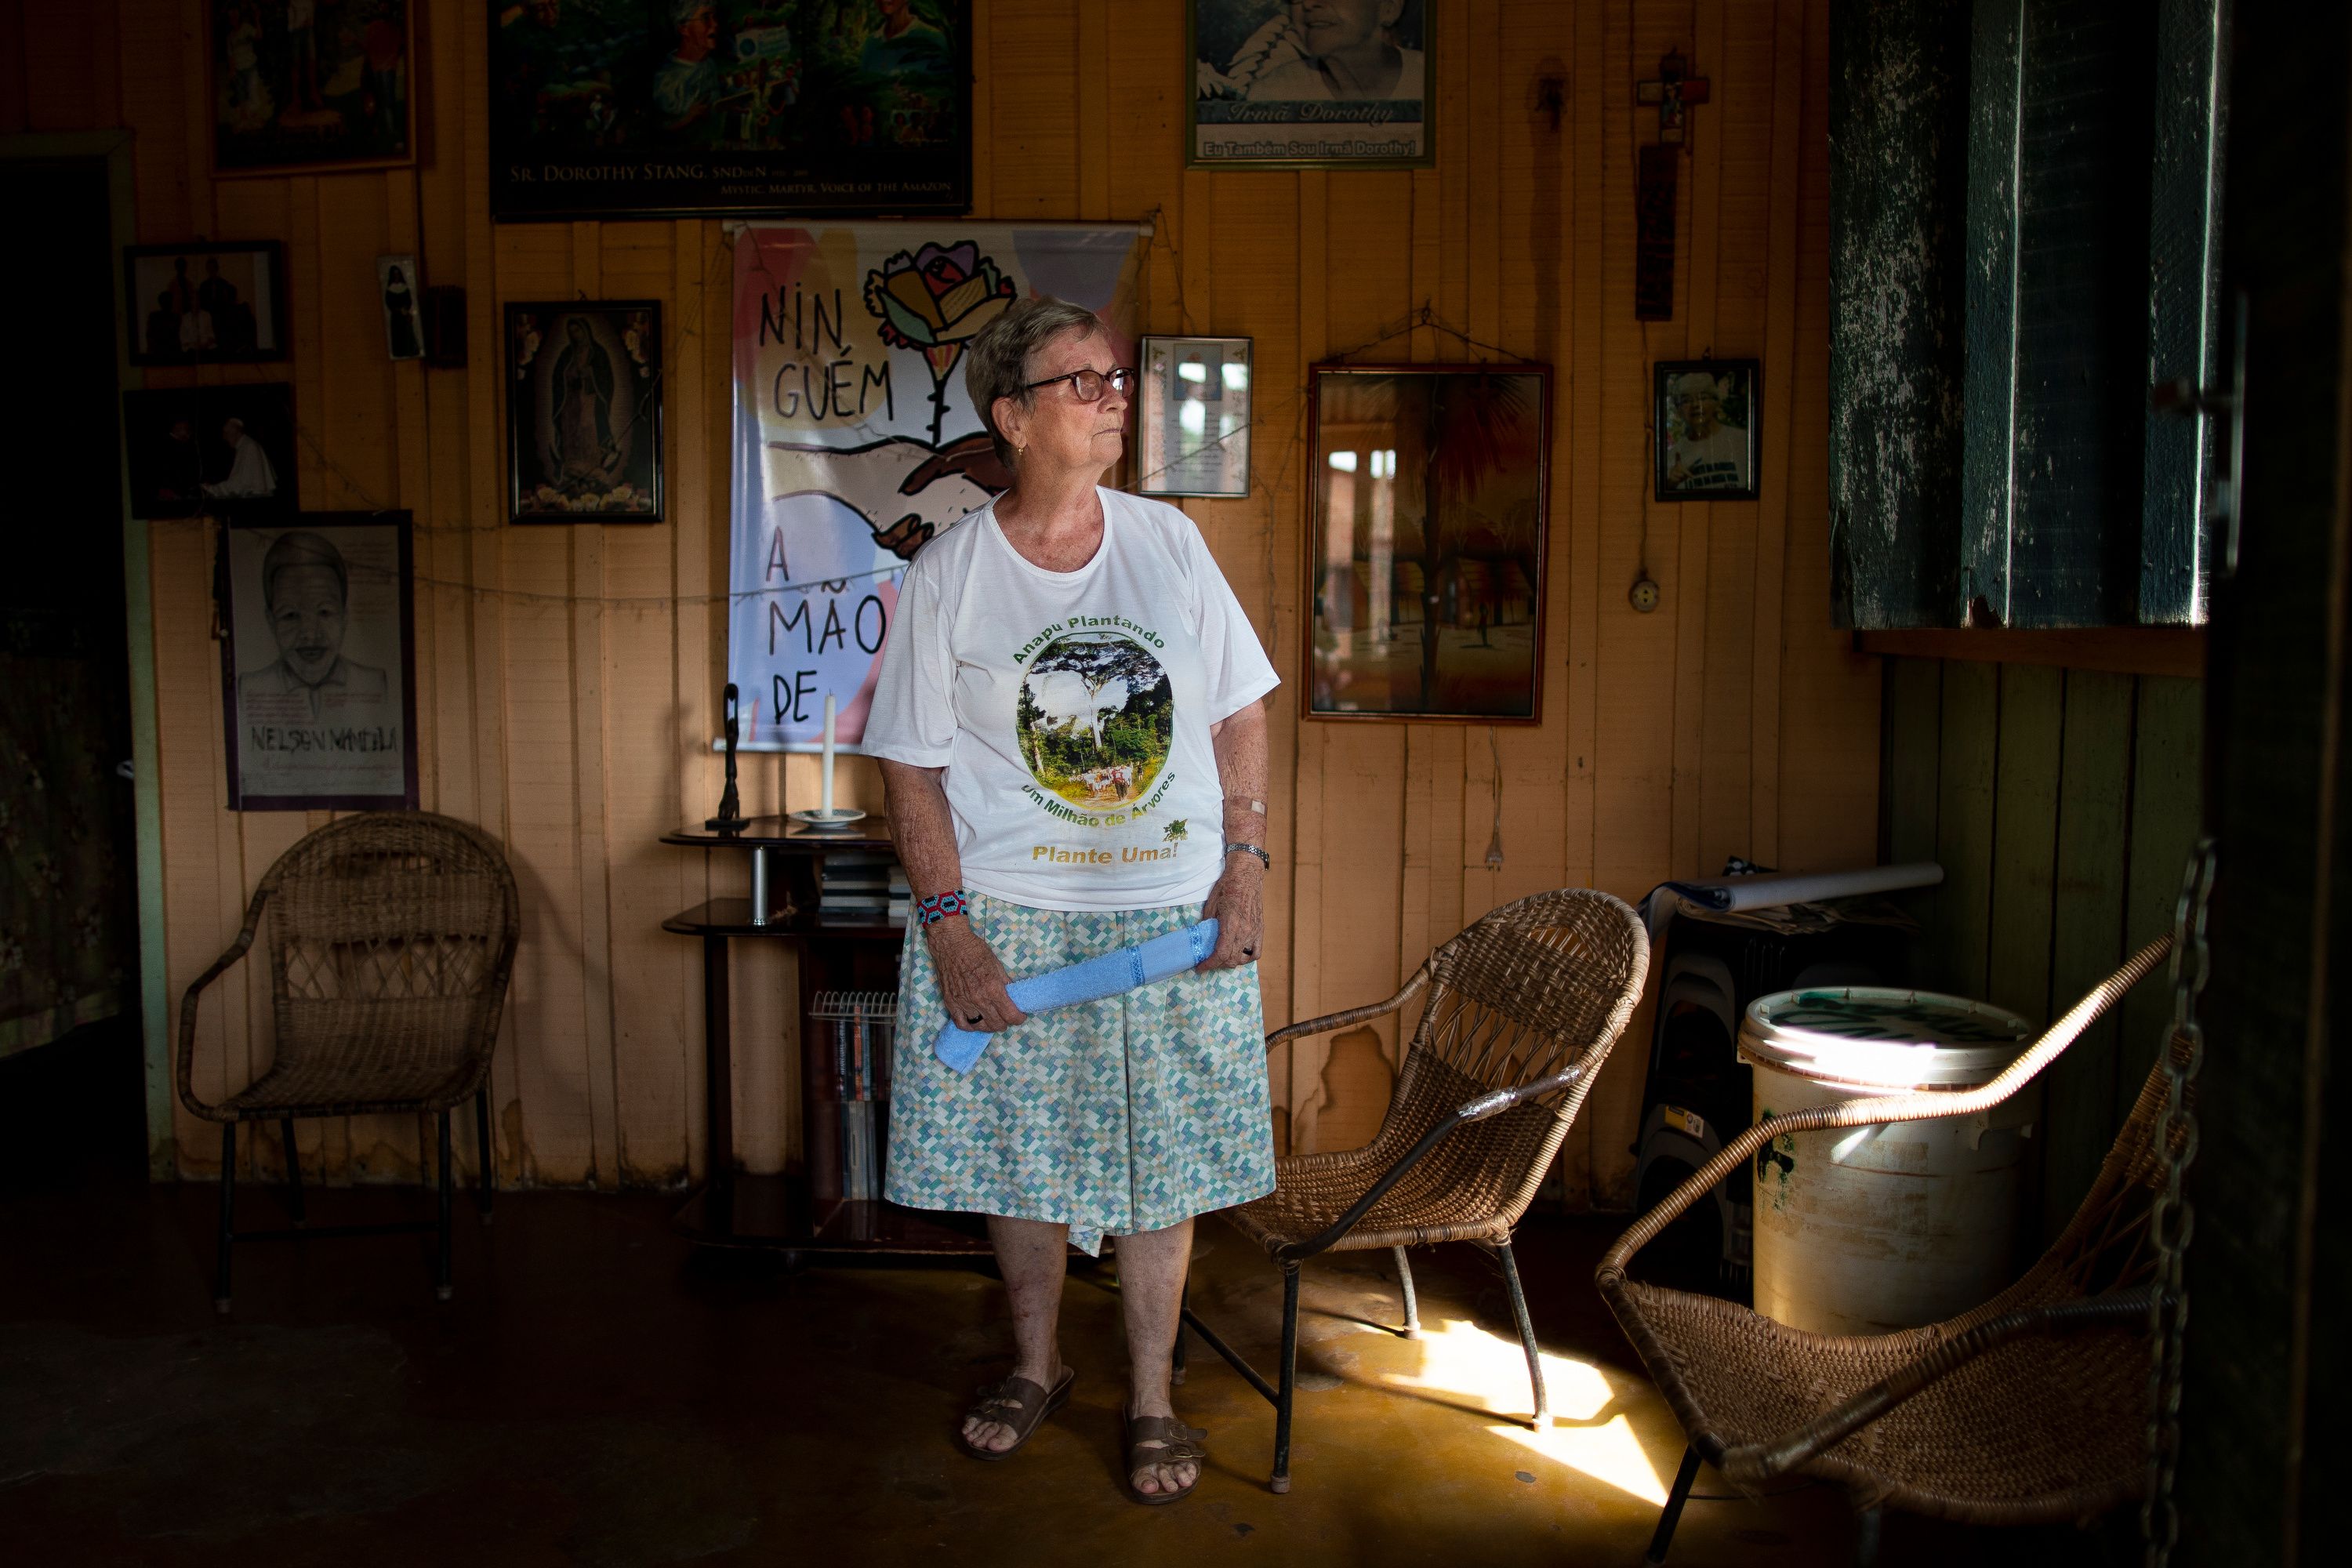 Sister Jane Dwyer stands for a portrait in her home in Anapu. Image by Spenser Heaps. Brazil, 2019.